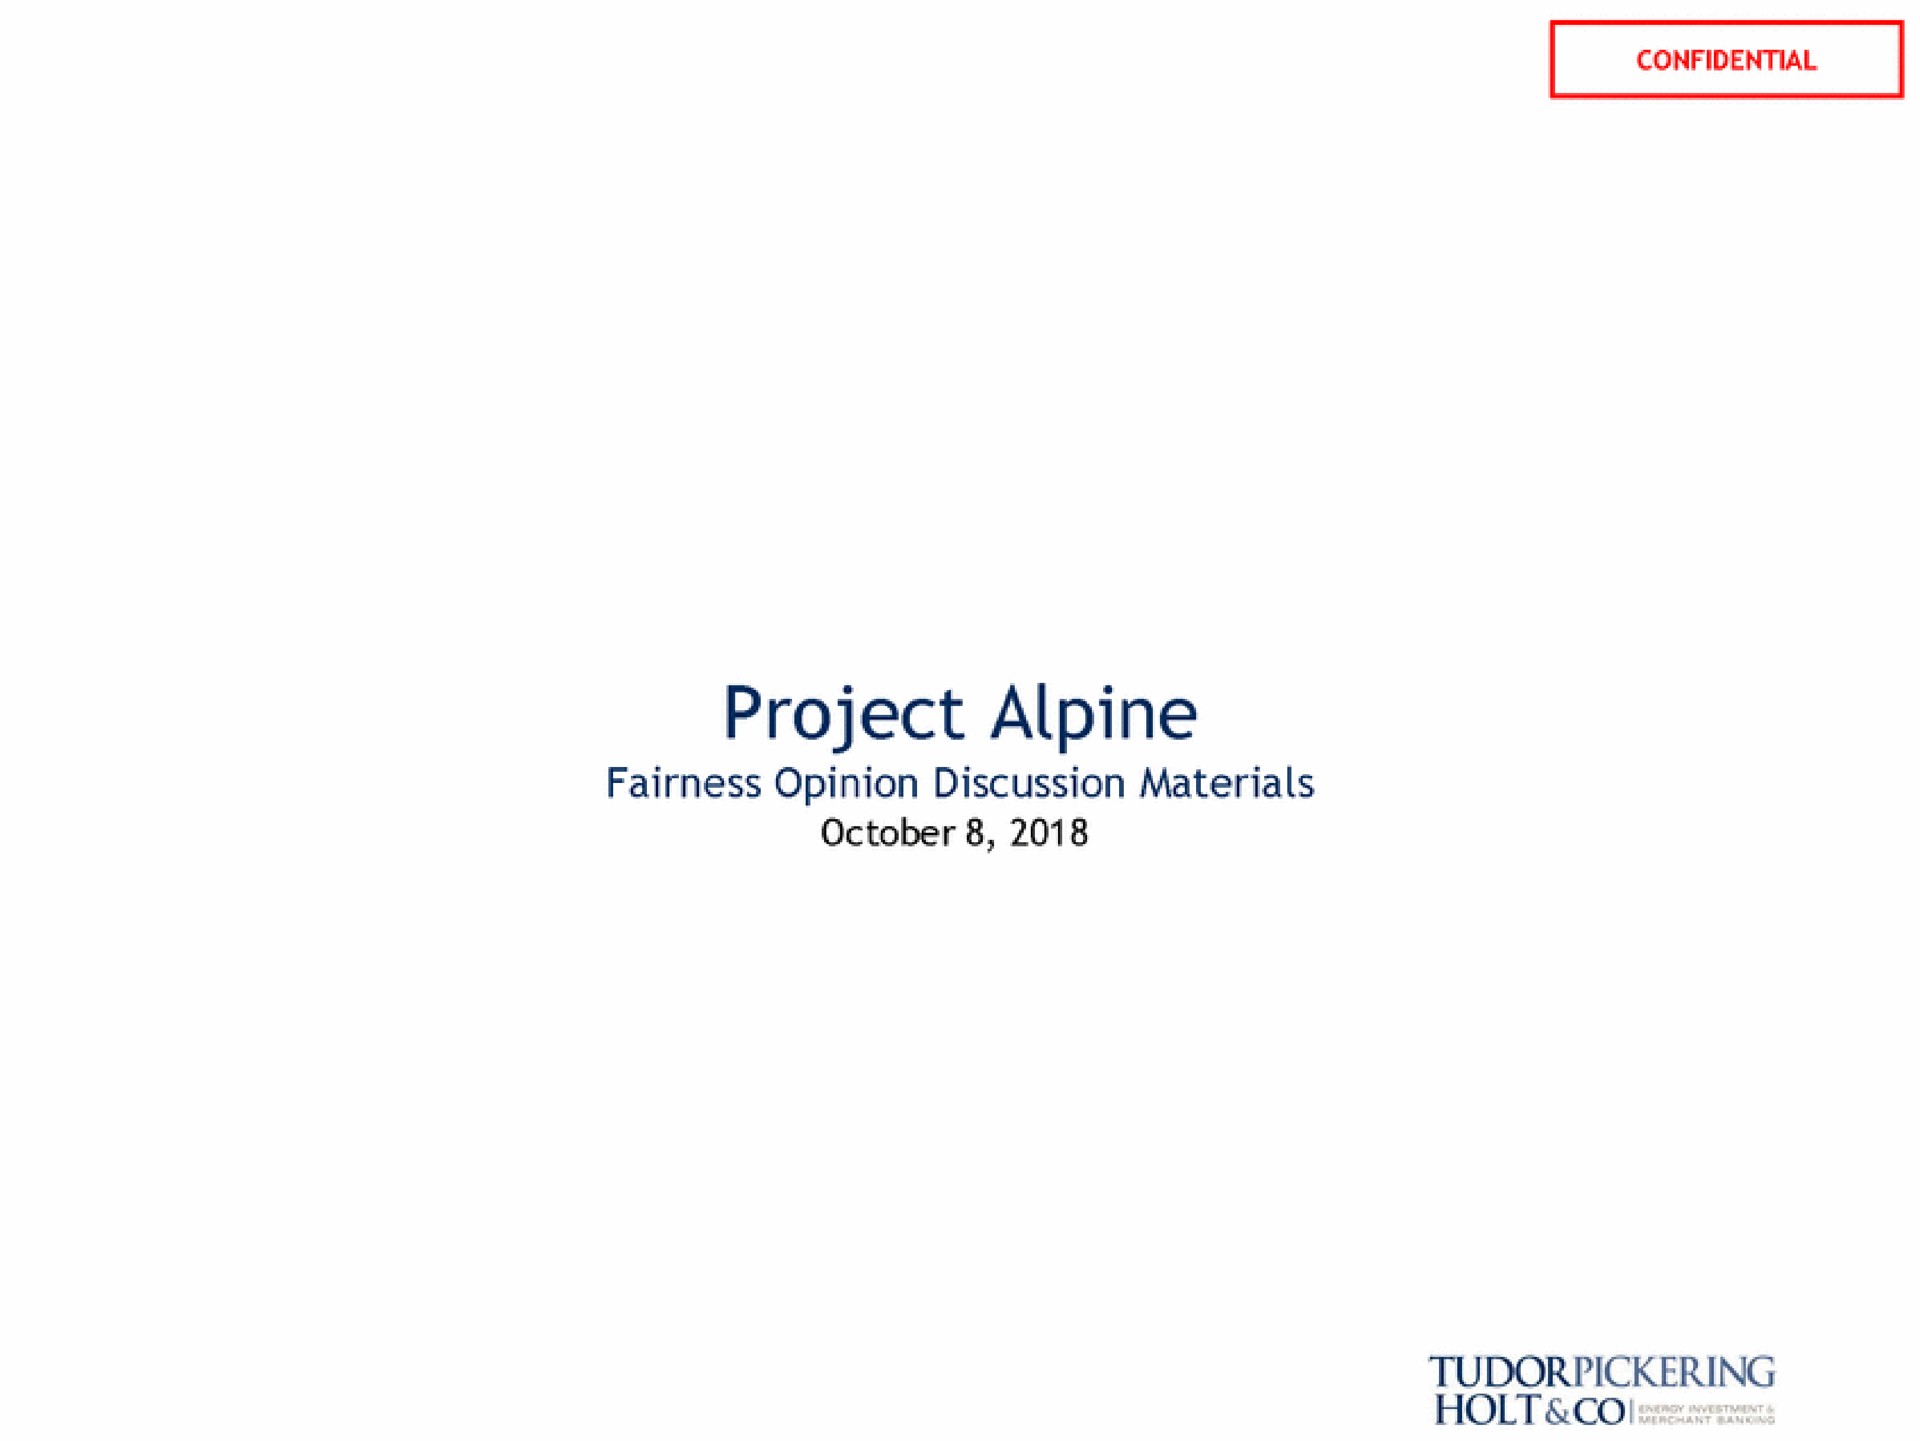 project alpine fairness opinion discussion materials holt | Tudor, Pickering, Holt & Co